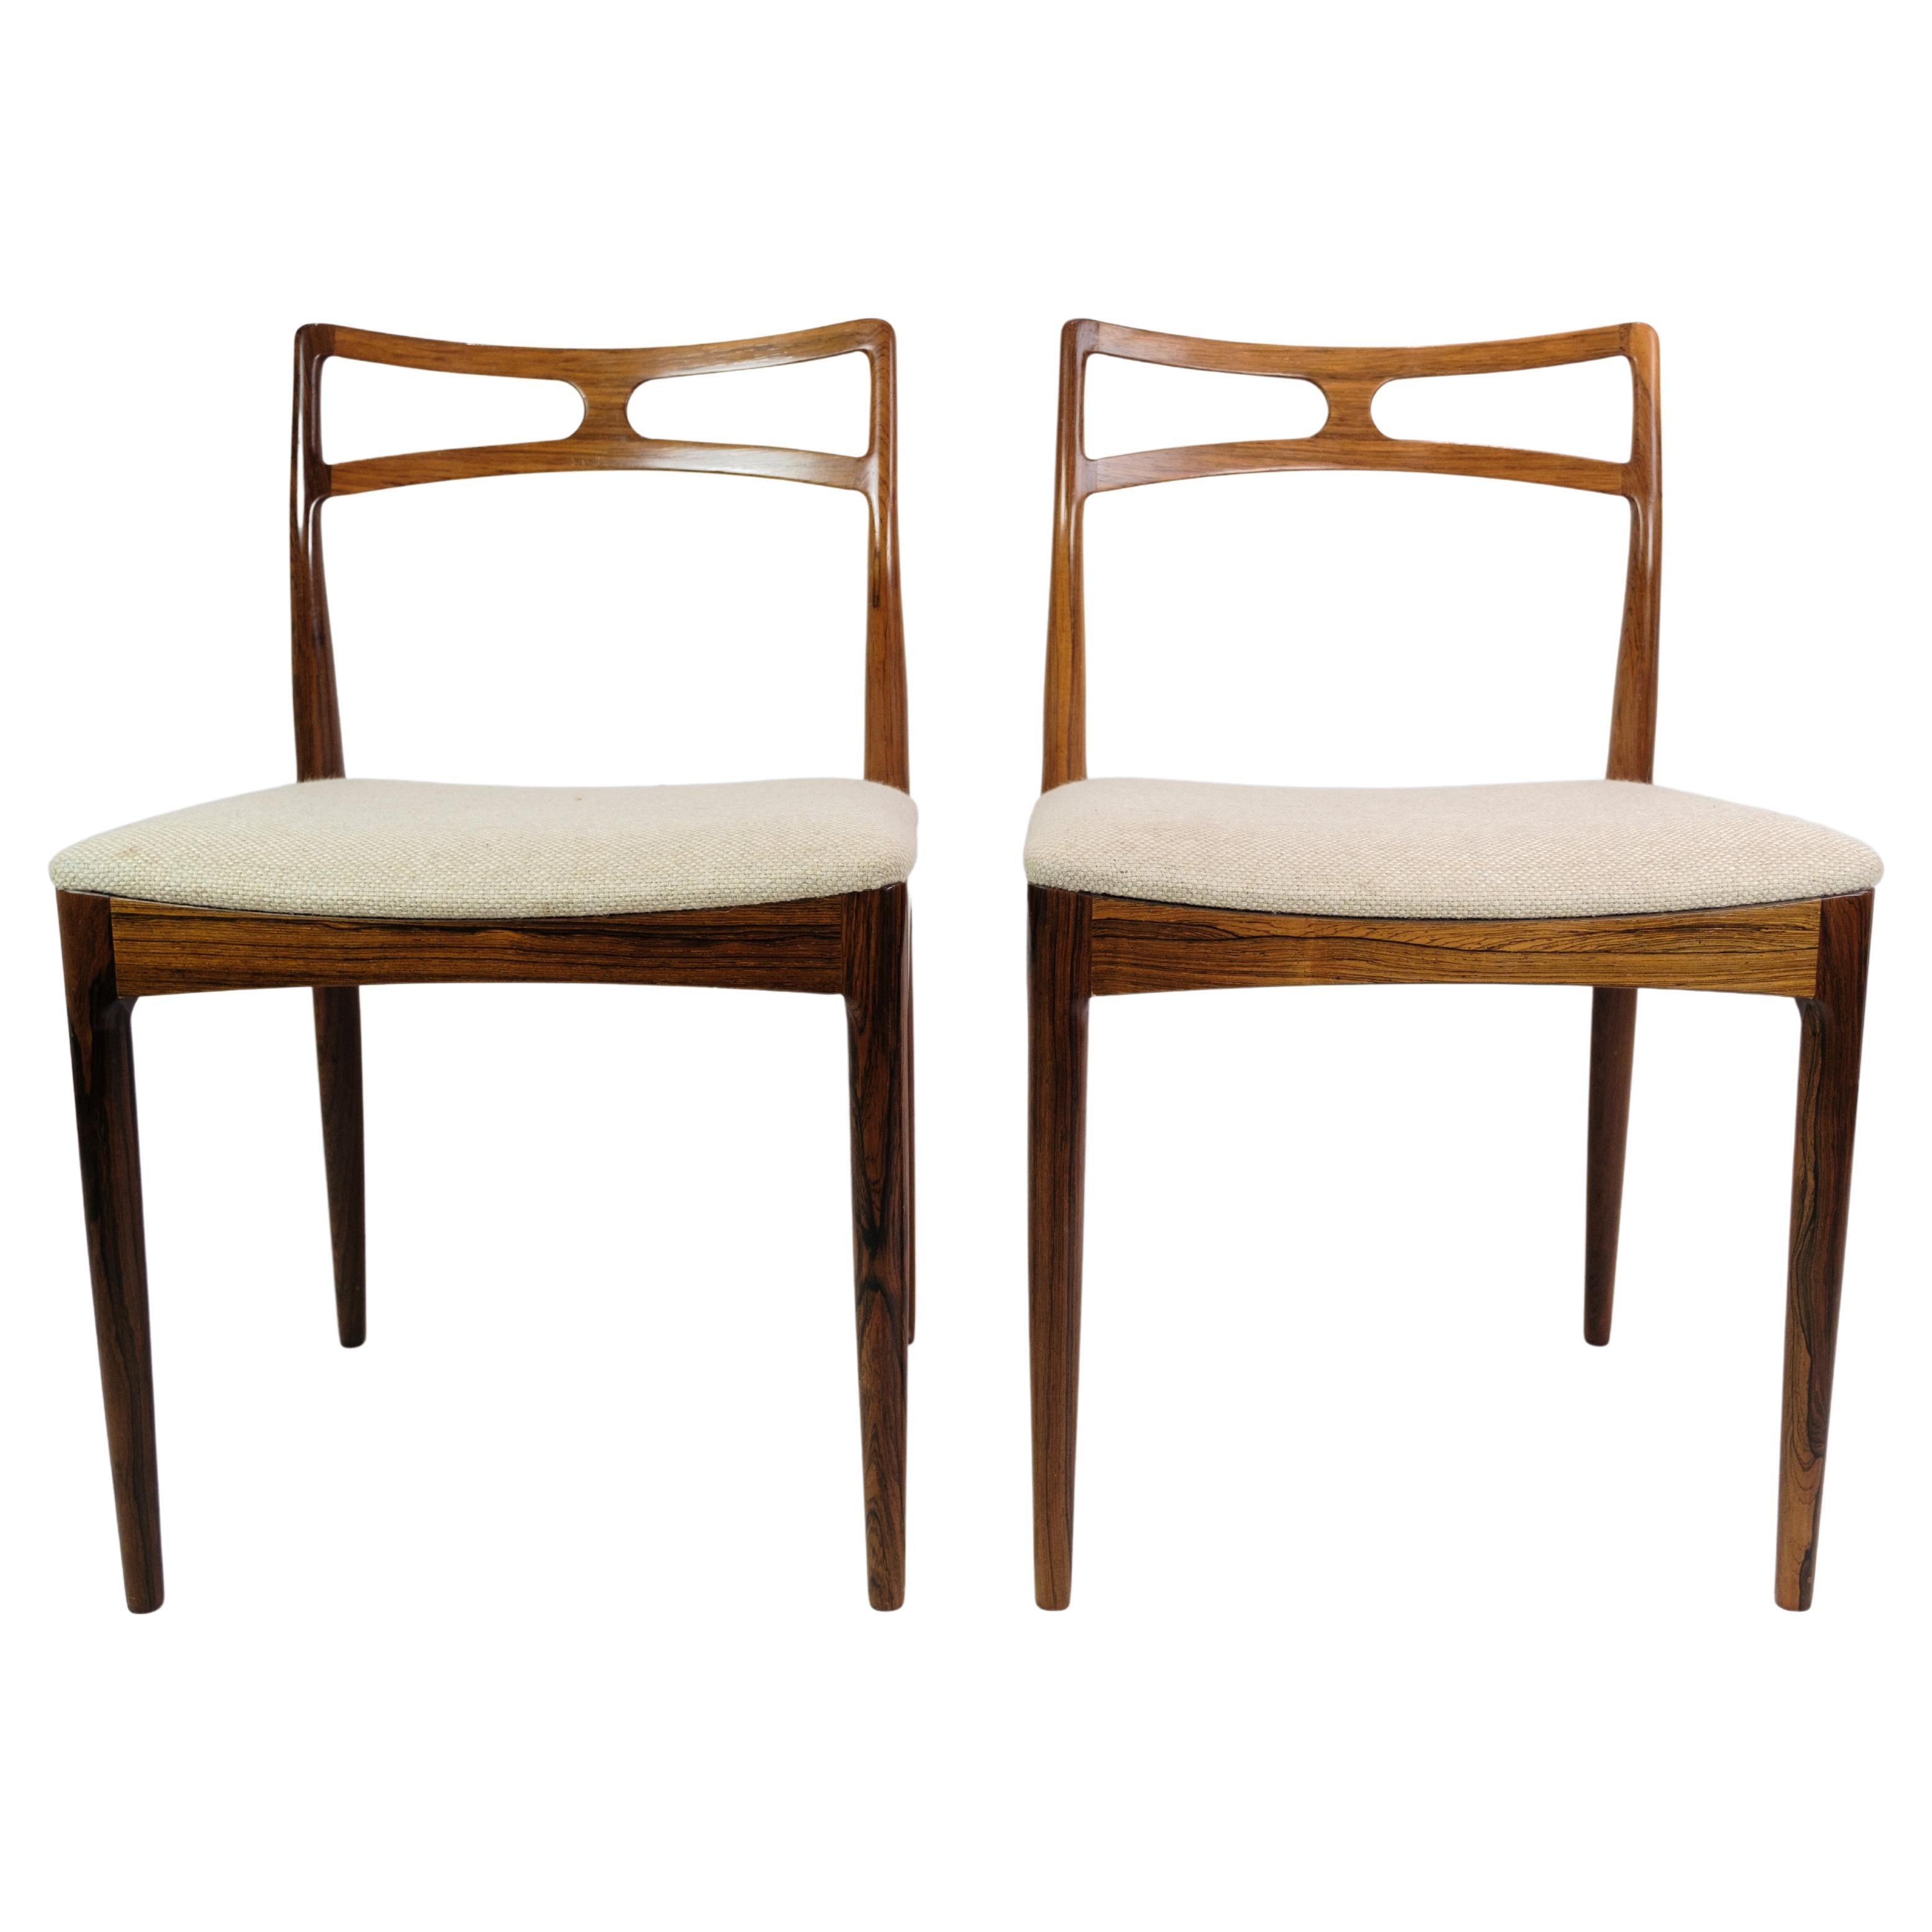 Set of 2 chairs In Rosewood, Model 94 Designed By Johannes Andersen From 1960s